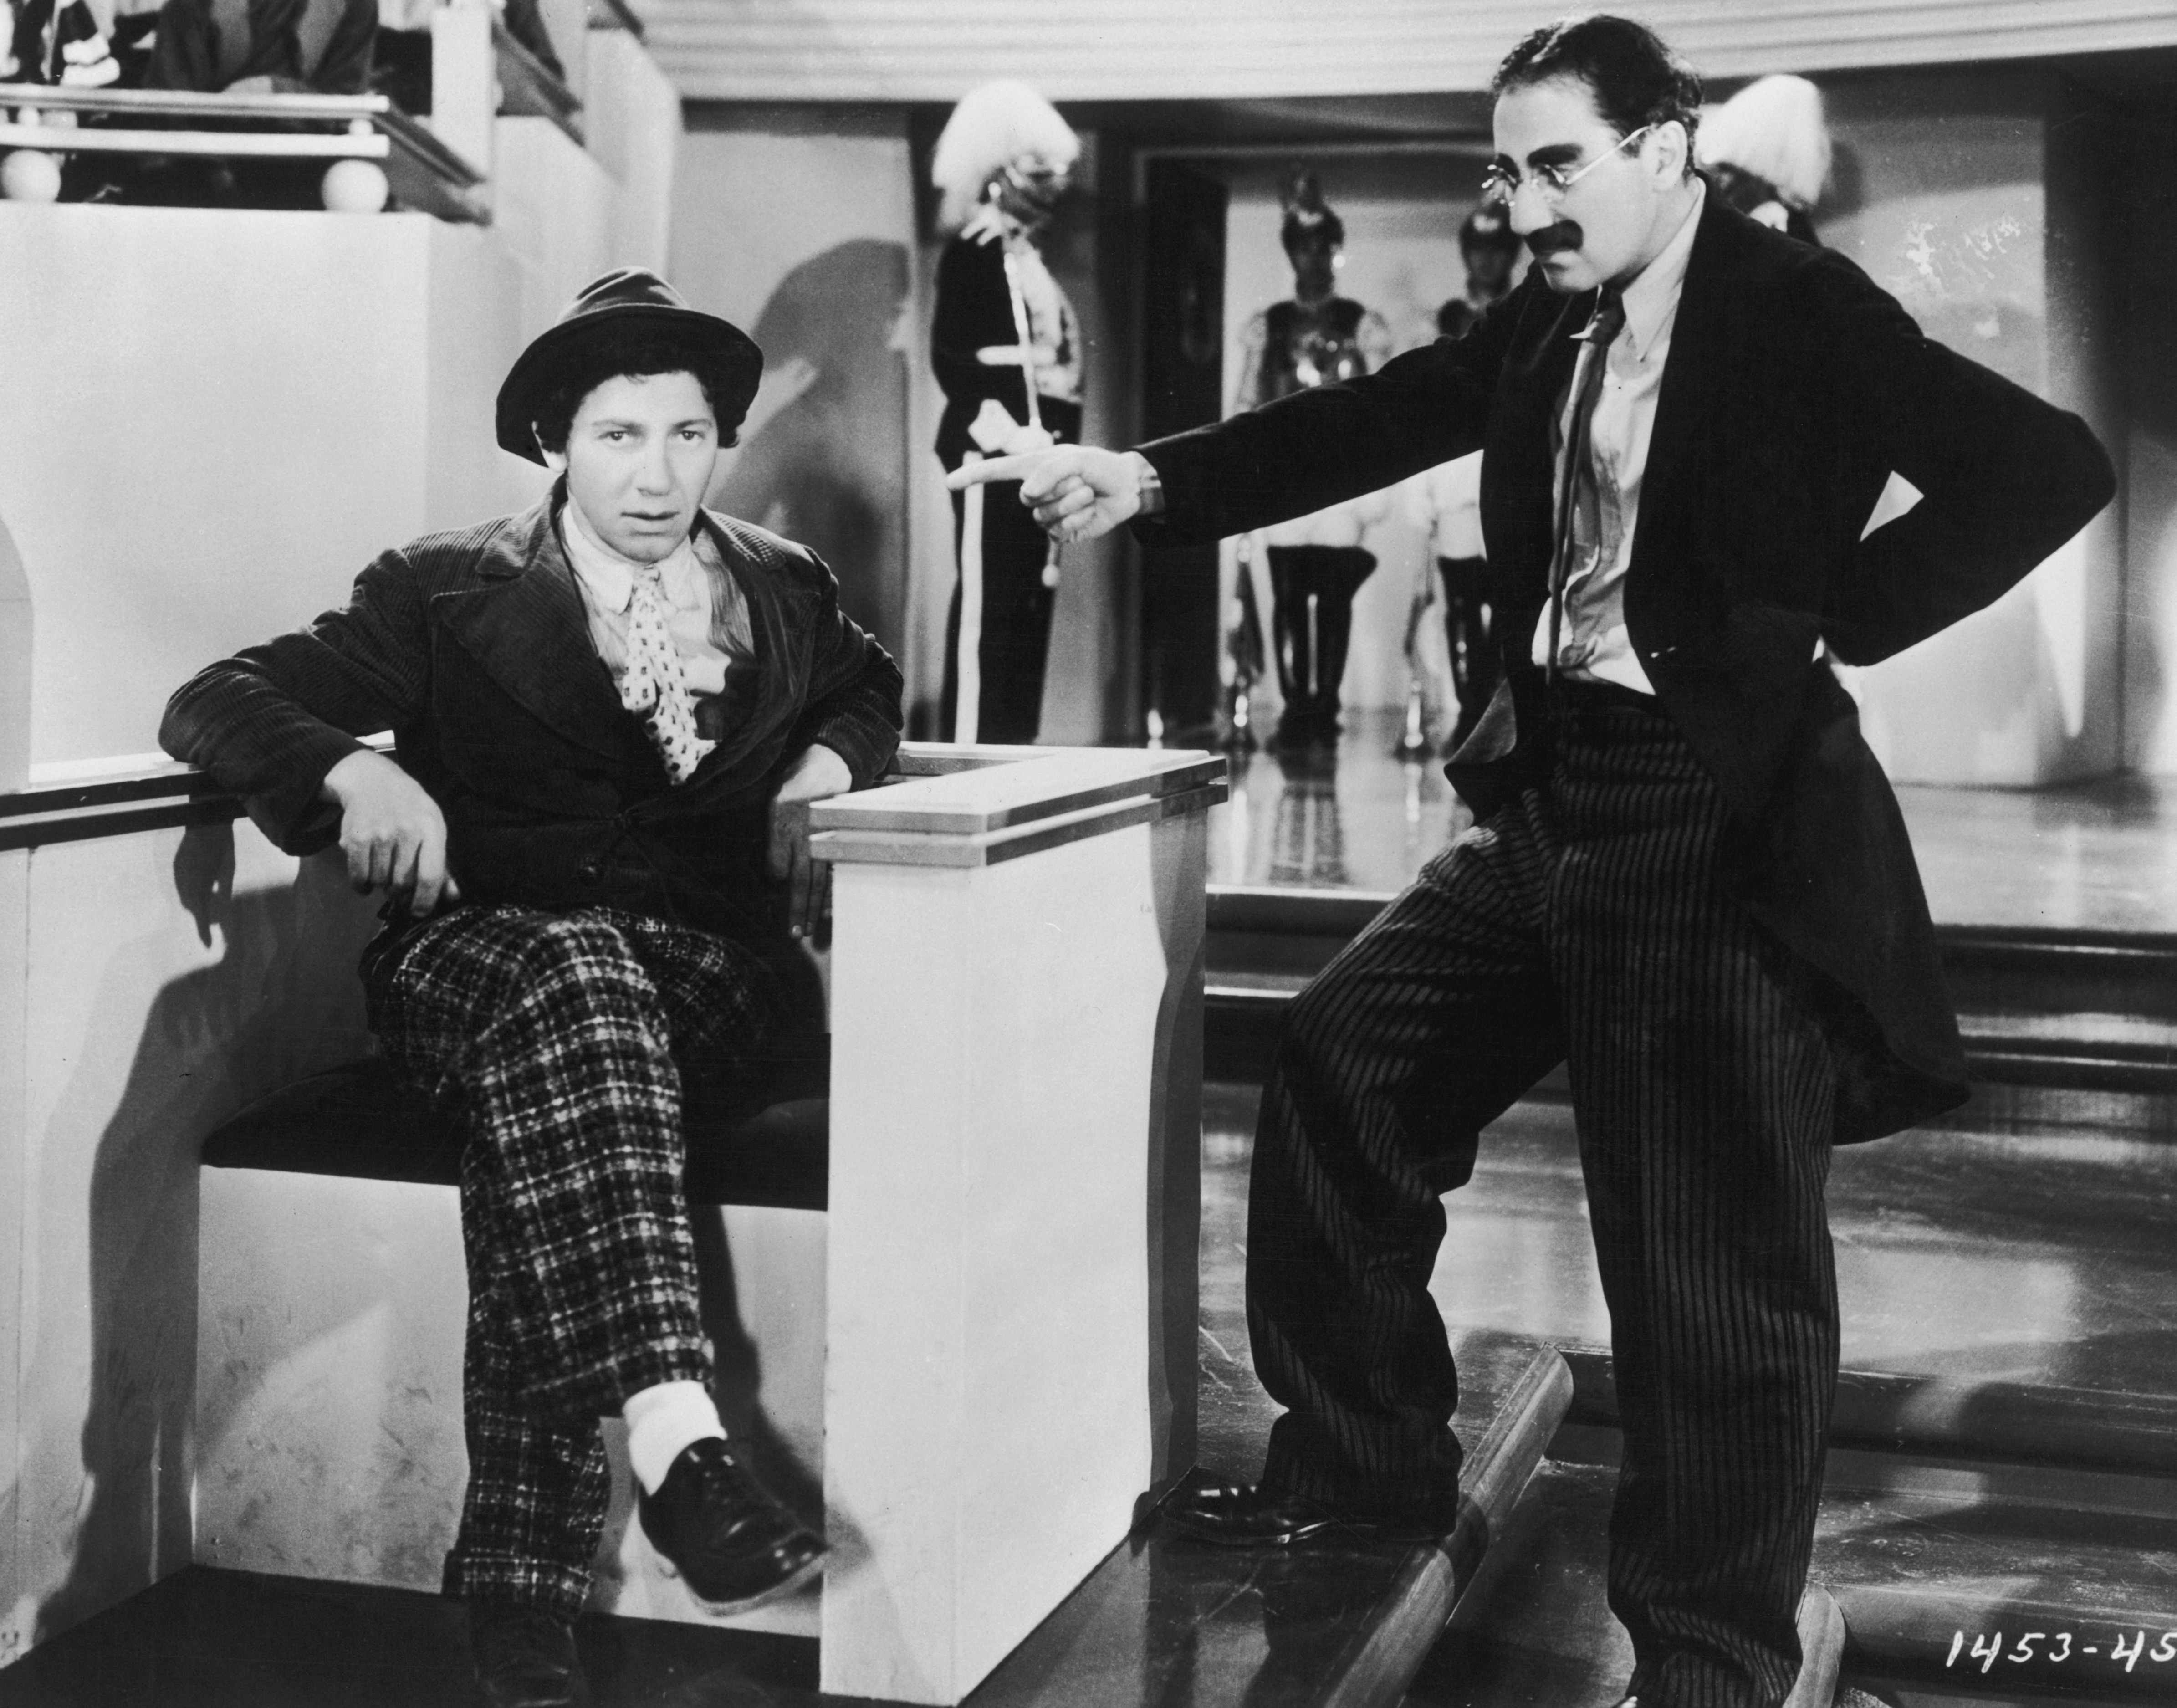 Still of Groucho Marx, Chico Marx and The Marx Brothers in Duck Soup (1933)